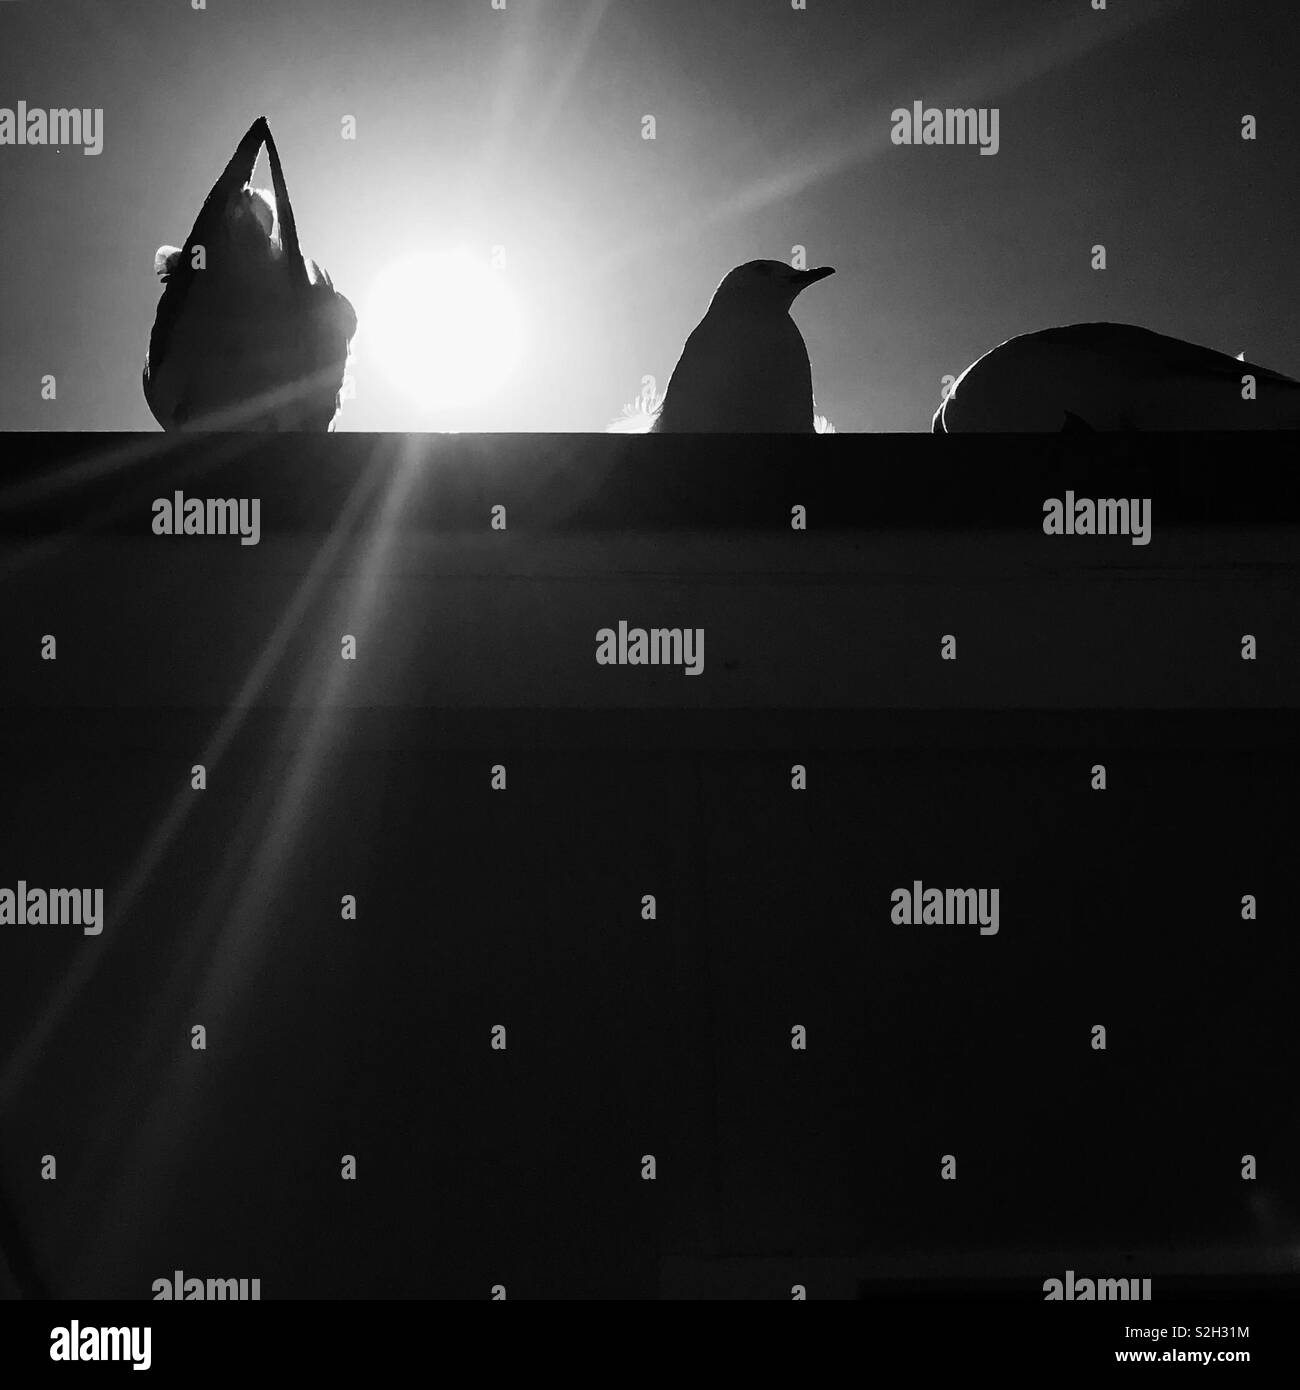 Rooftop silhouettes Stock Photo - Alamy